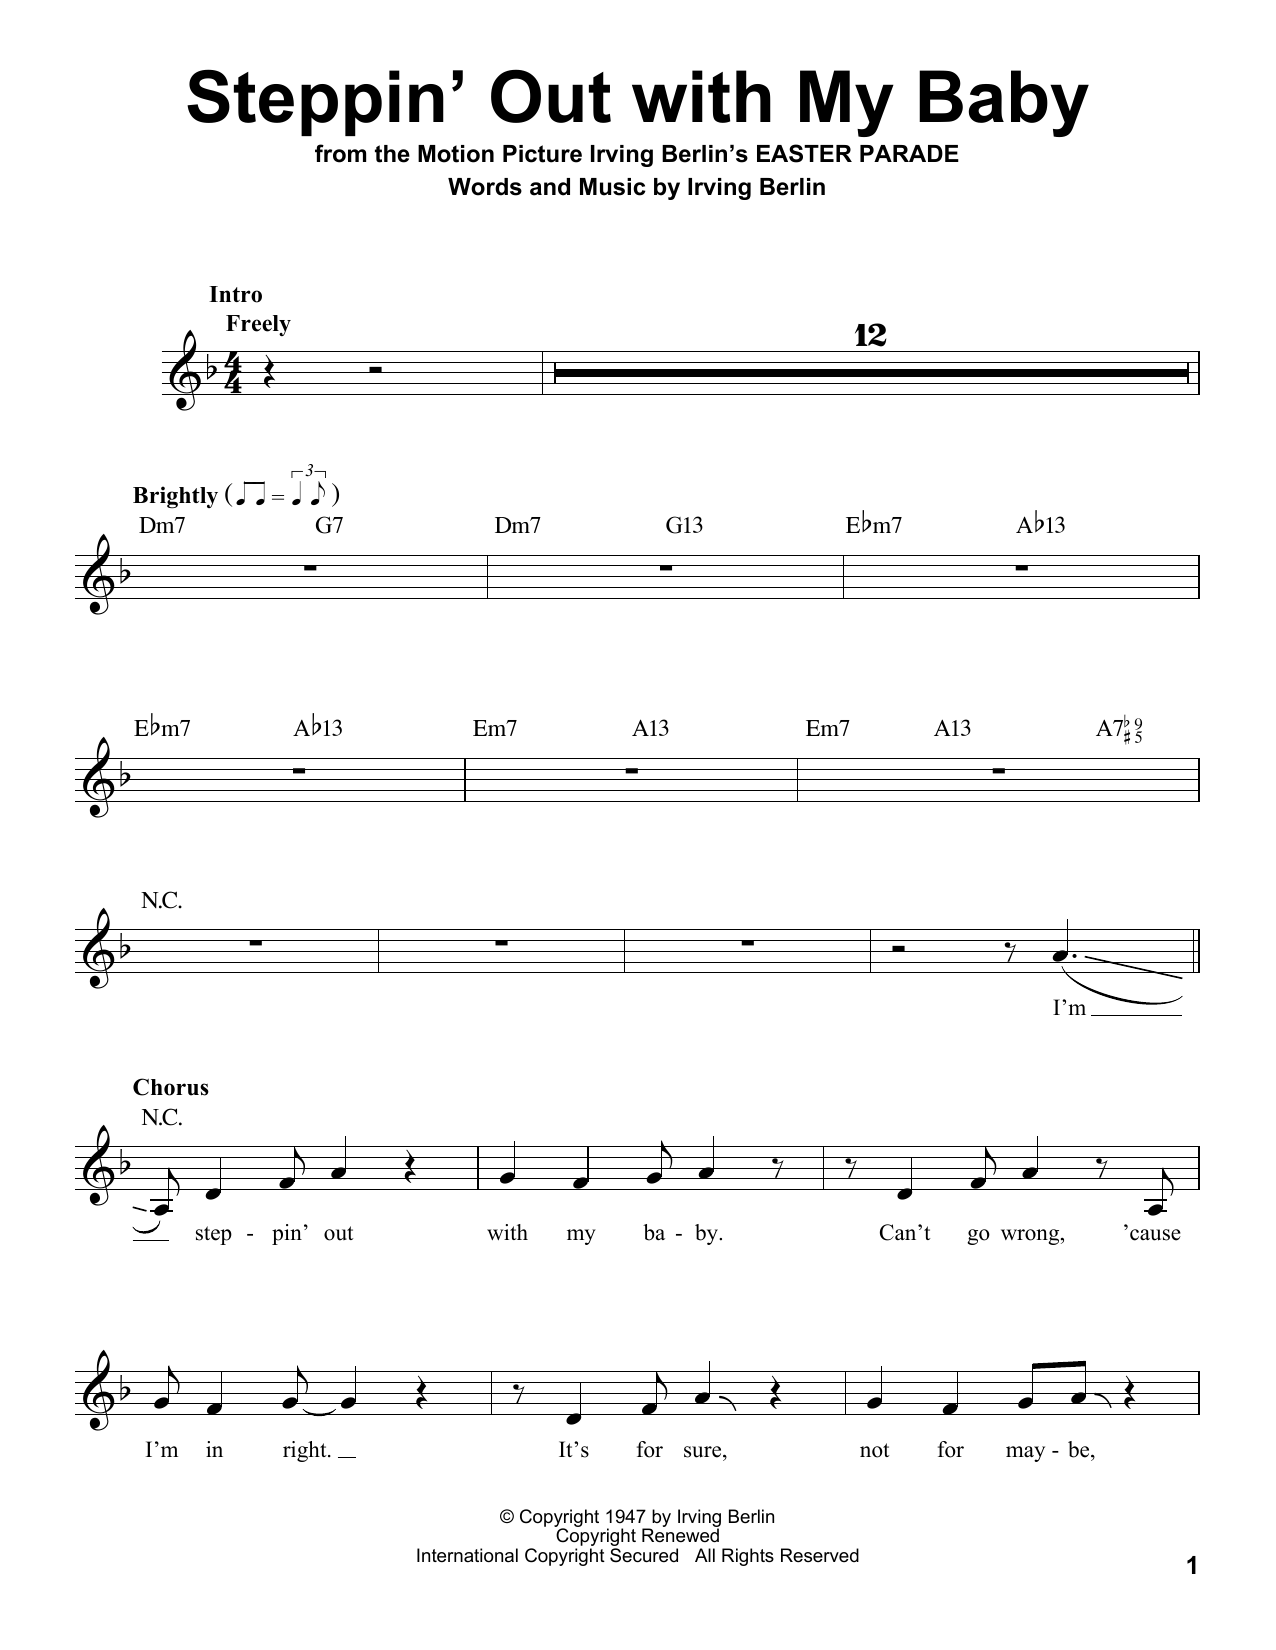 Download Irving Berlin Steppin' Out With My Baby Sheet Music